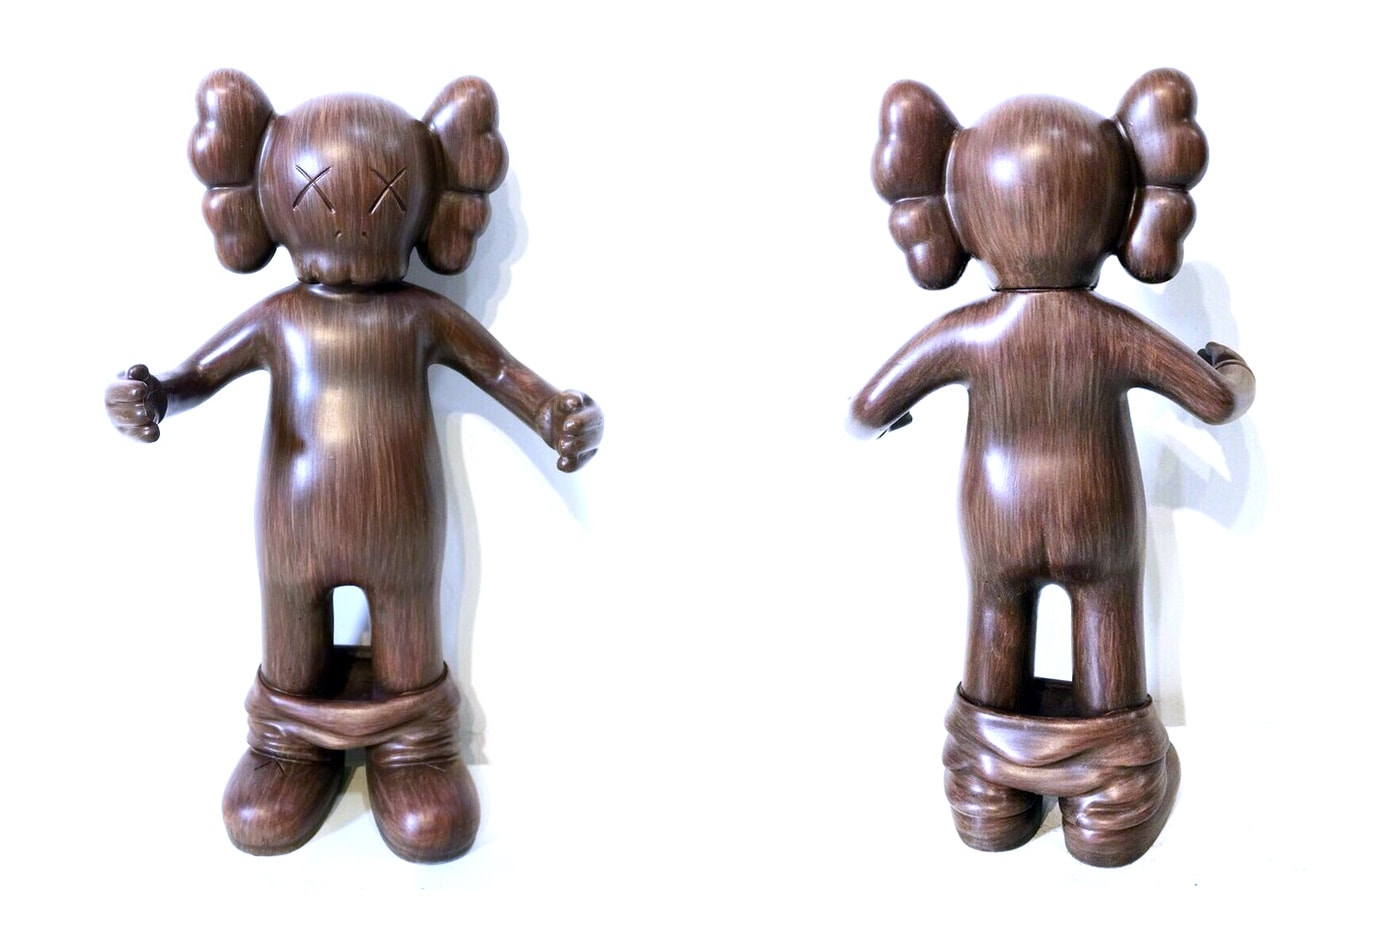 OriginallyFake Woody FLABSLAB KAWS figurine sculpture collectible purchase